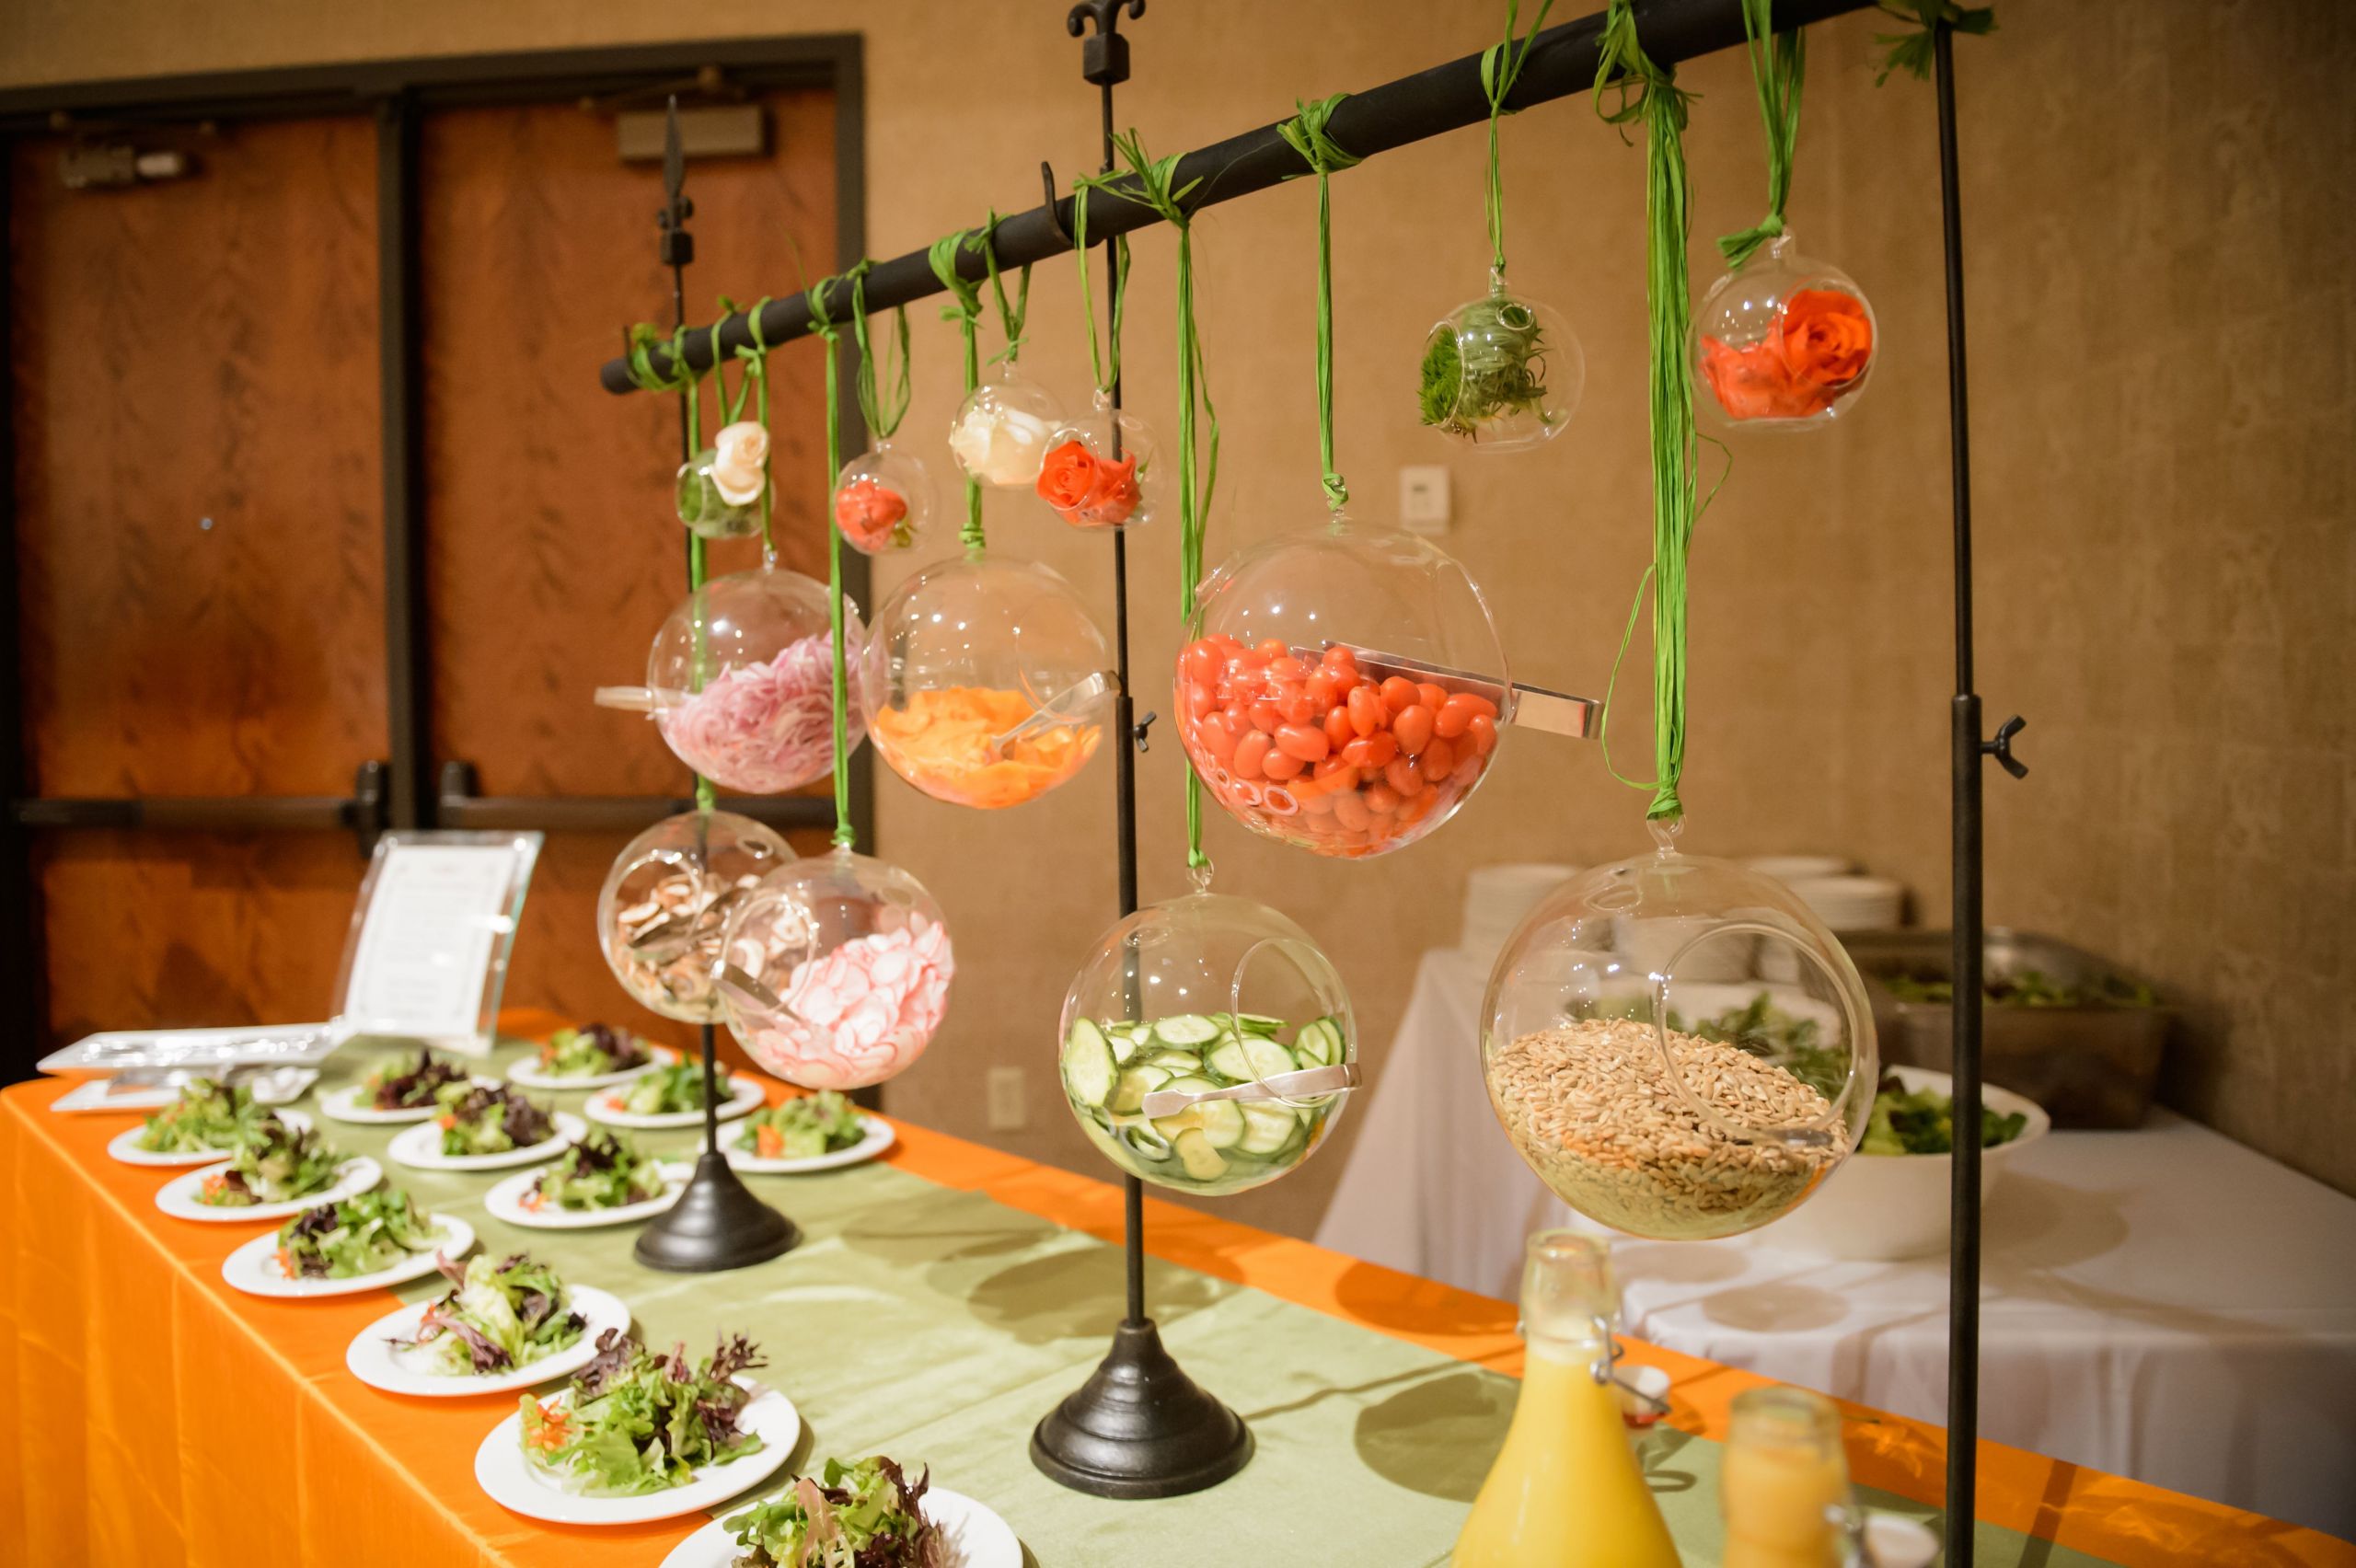 Party Food Display Ideas
 Such a creative way to set up a salad bar in 2019